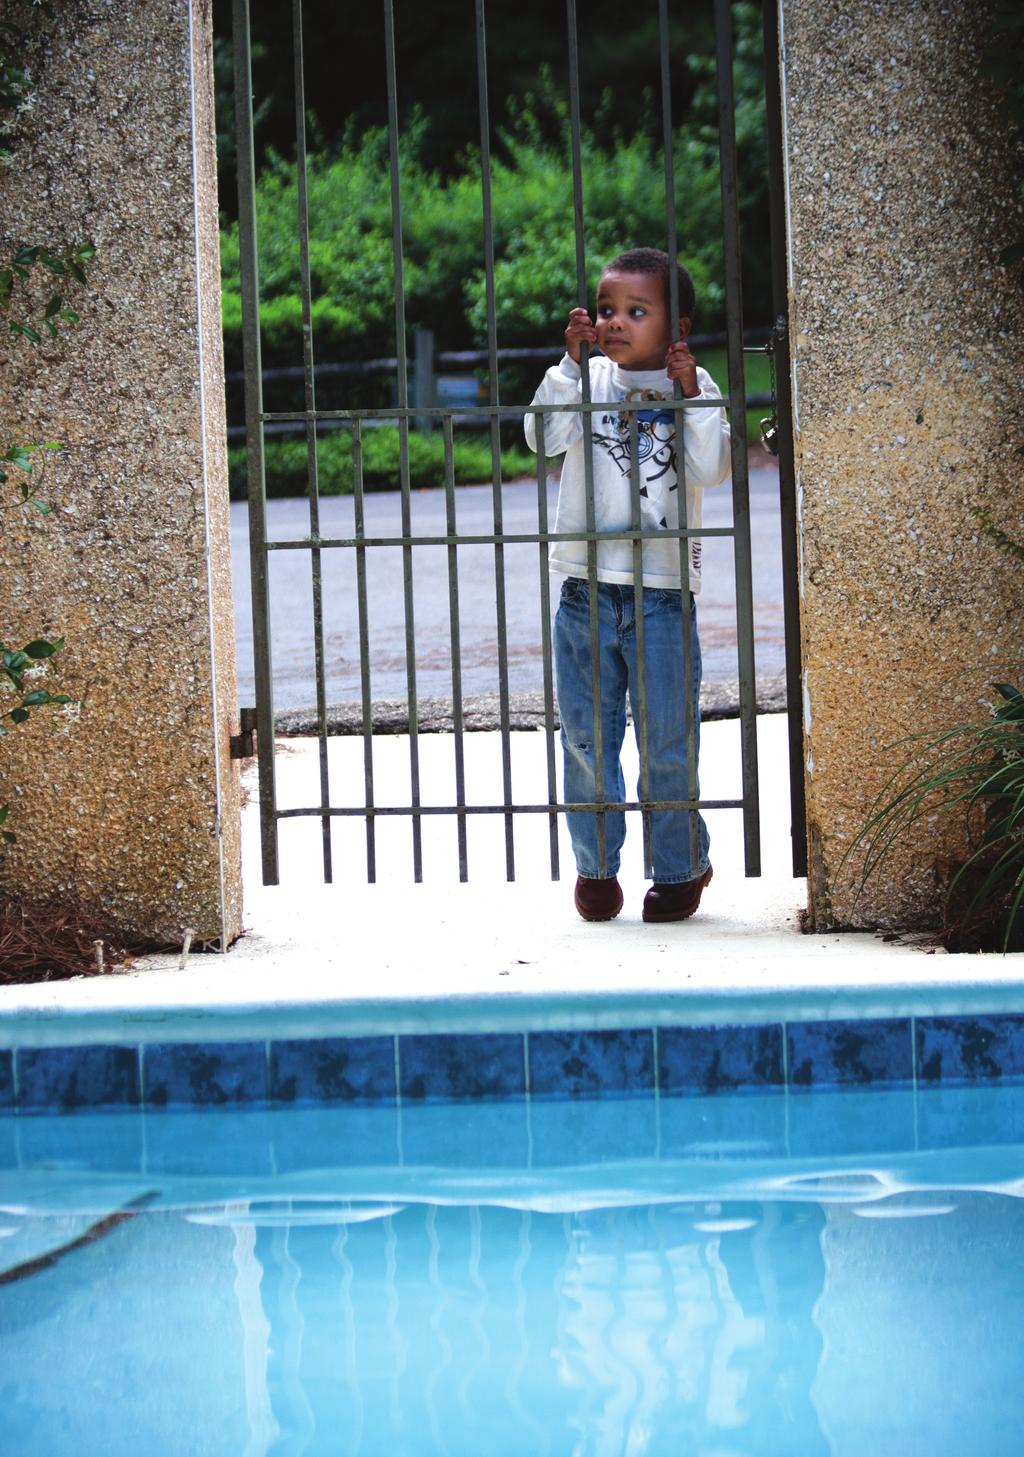 LAYER 2: BARRIERS A child should never be able to enter the pool area unaccompanied by a guardian. Barriers physically block a child from the pool.